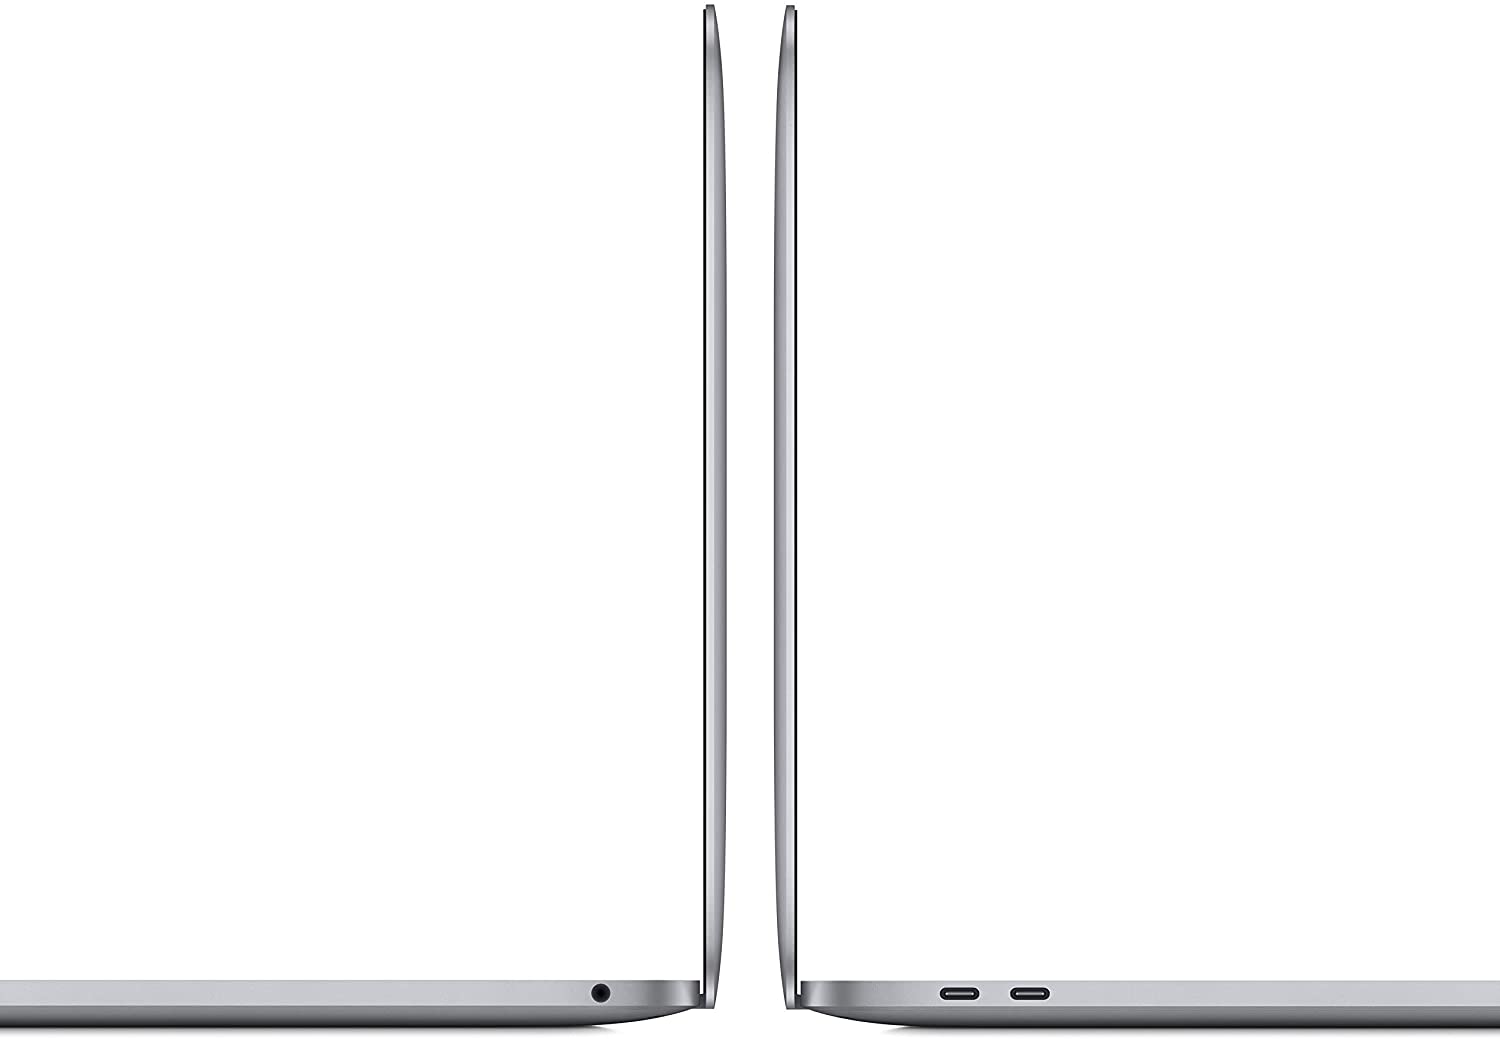 MacBook Pro 13-inch with Touch Bar and Touch ID (2020) – Core i5 1.4GHz 8GB 512GB - Space Gray